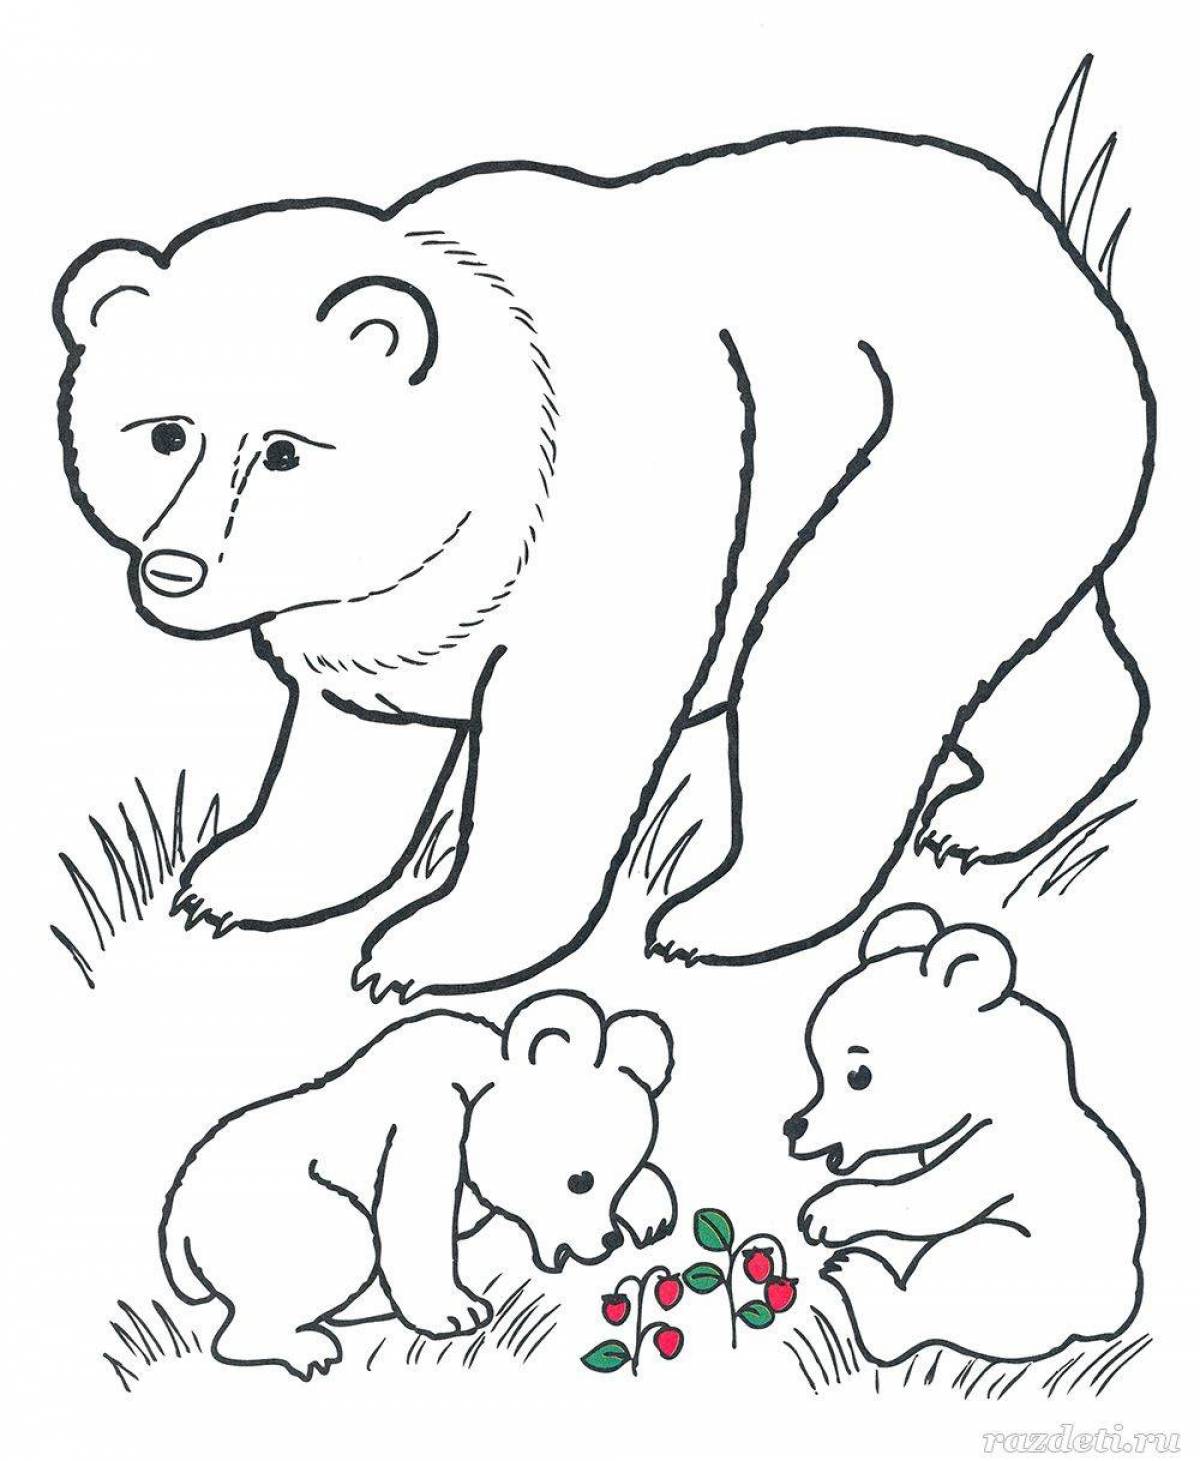 Colorful wild animal coloring pages for kids